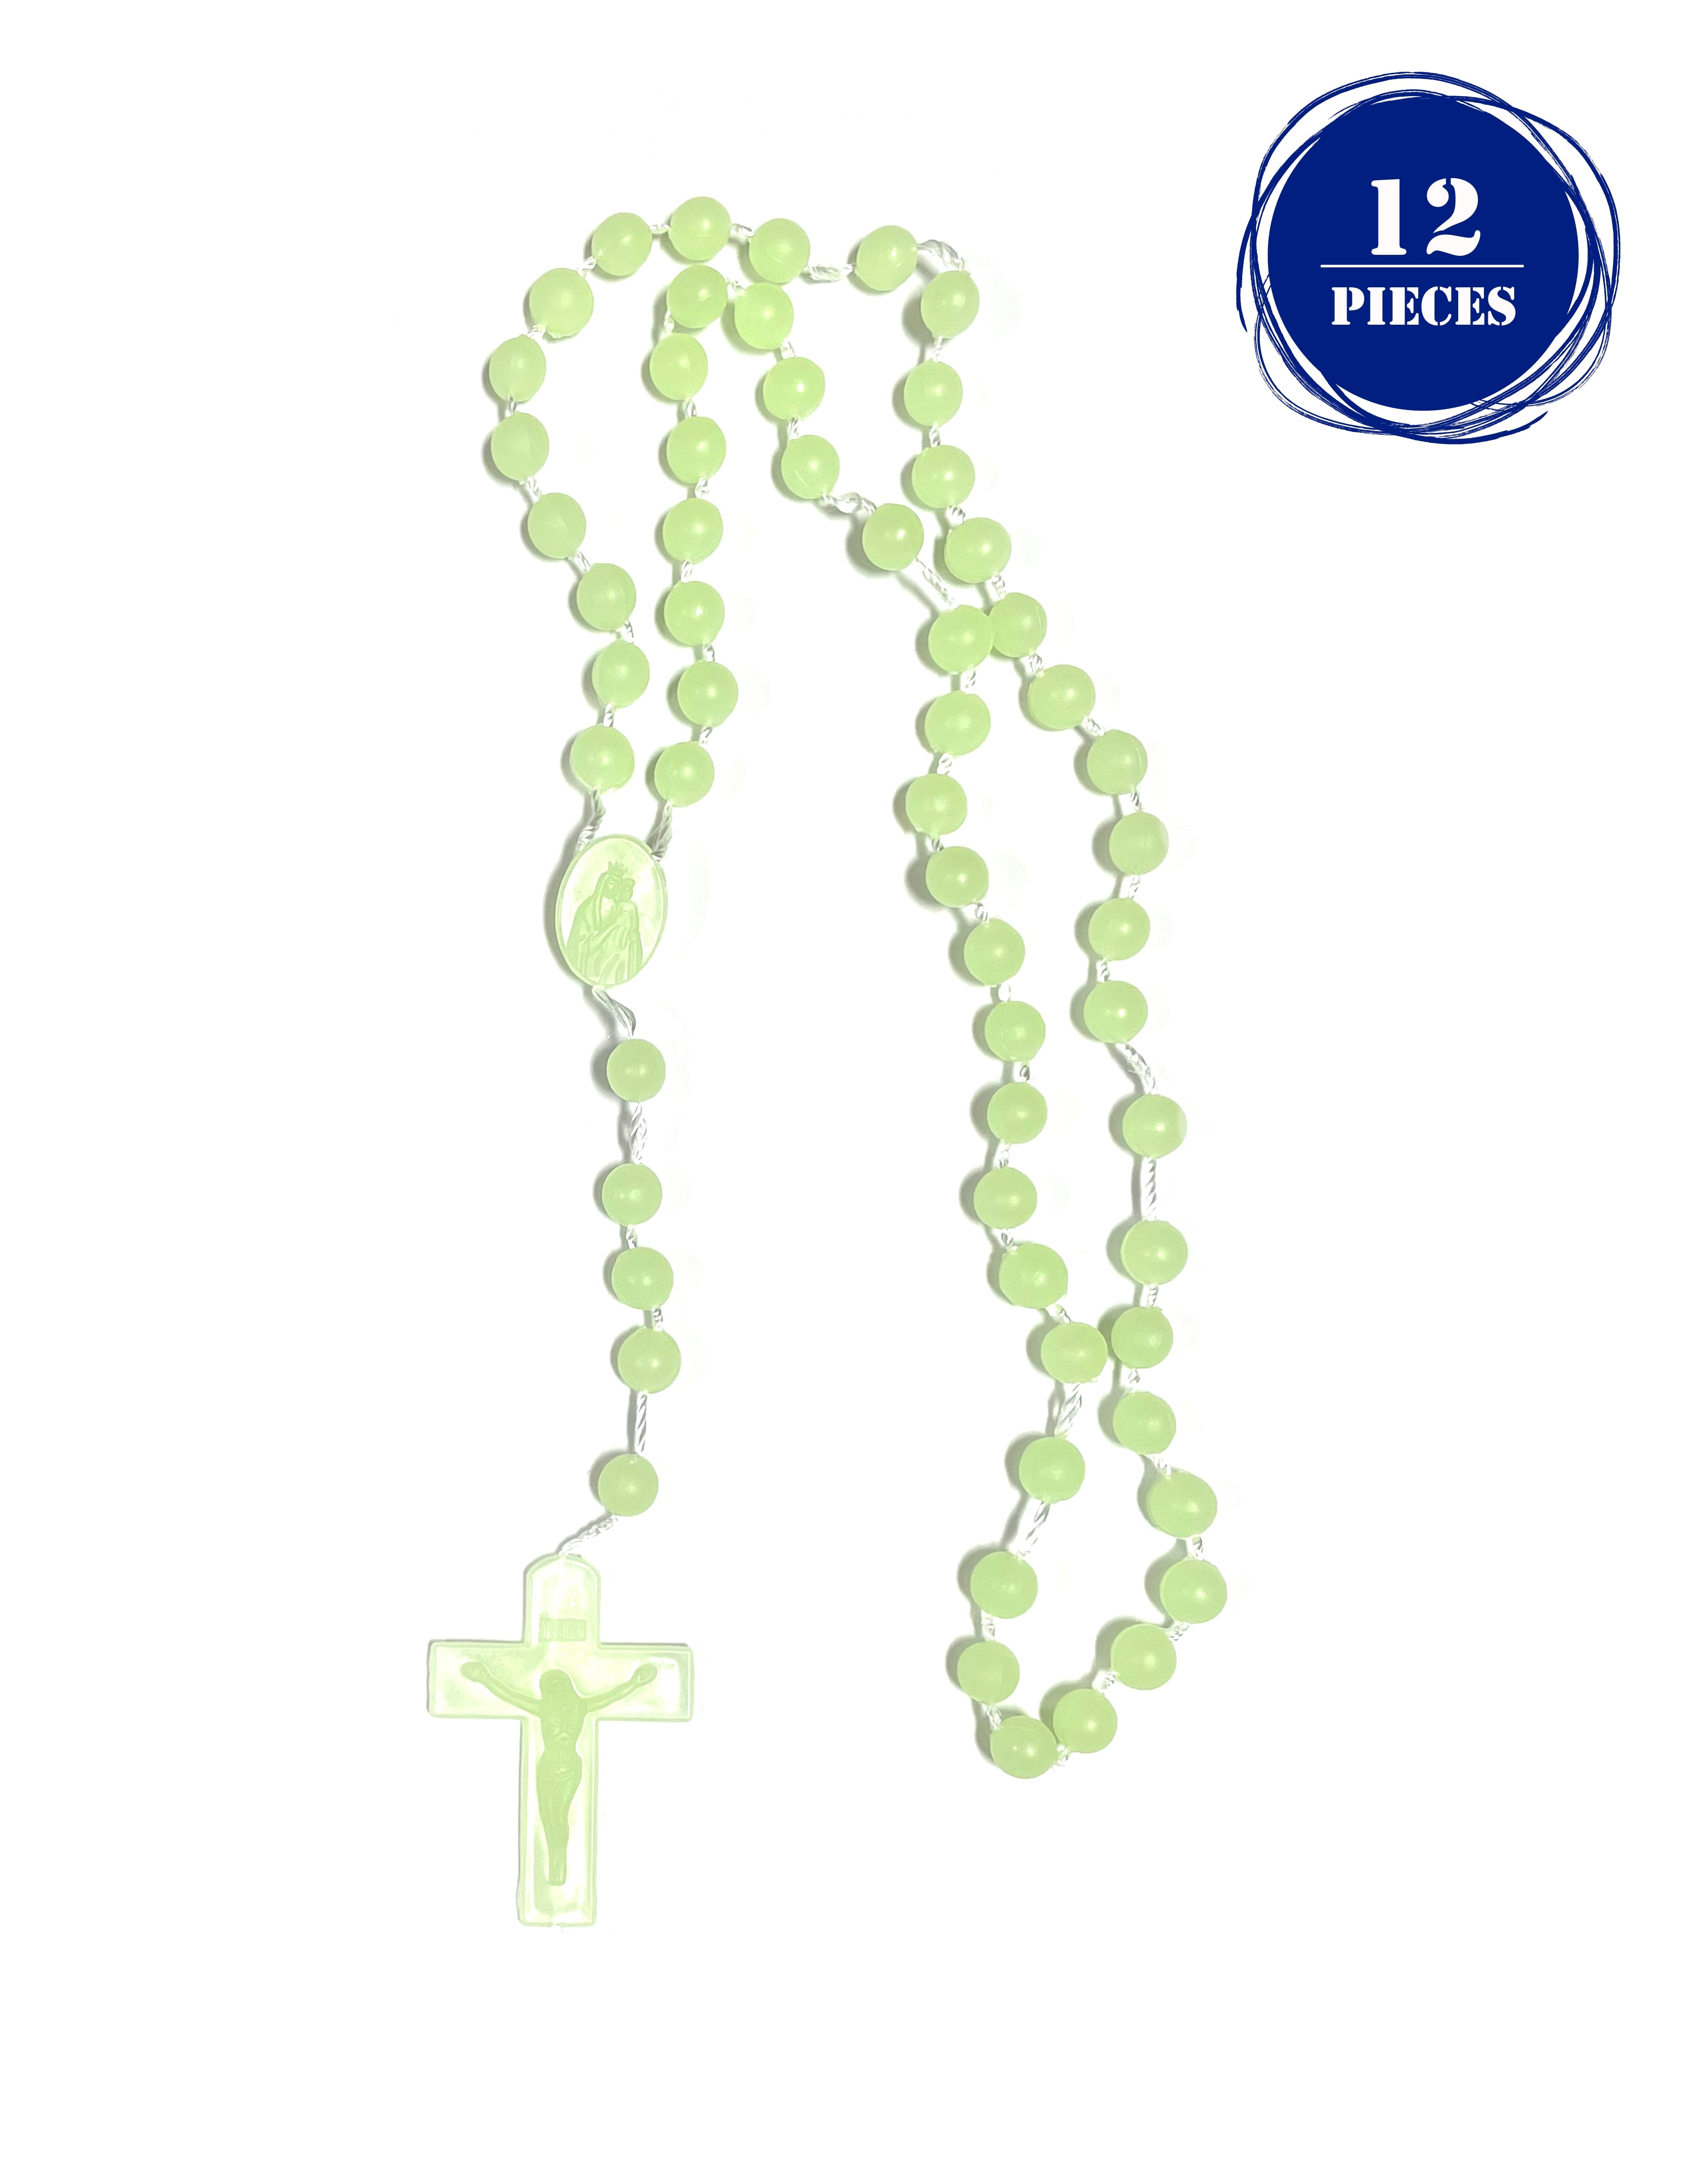 Plastic big beads and cord rosary - 12 Pieces